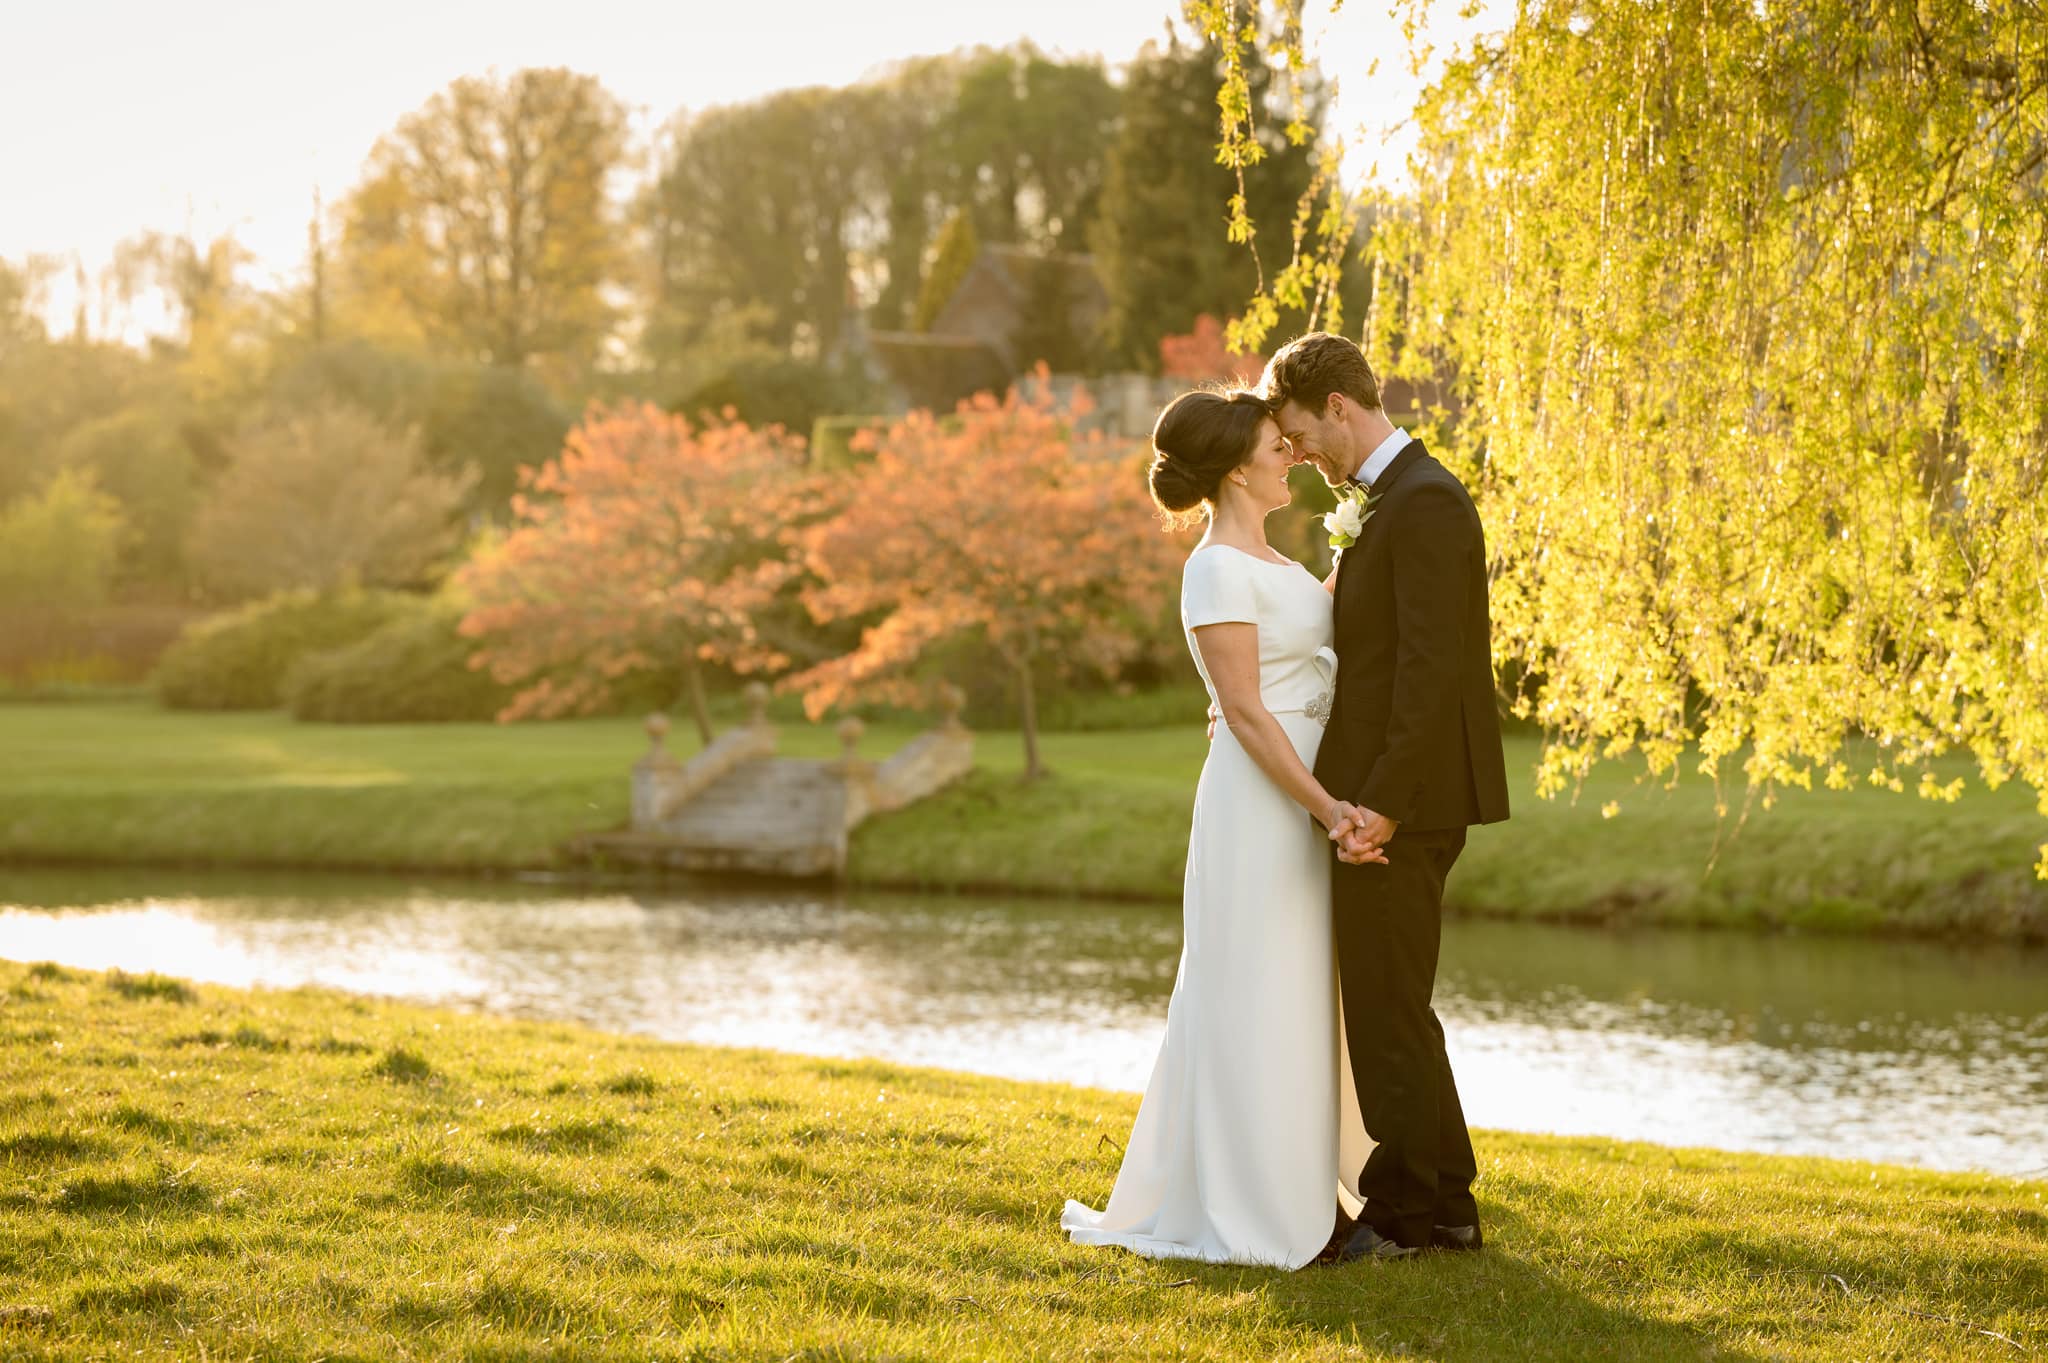 Bride and groom standing together by a willow tree on the riverbank at Deene Park during golden hour